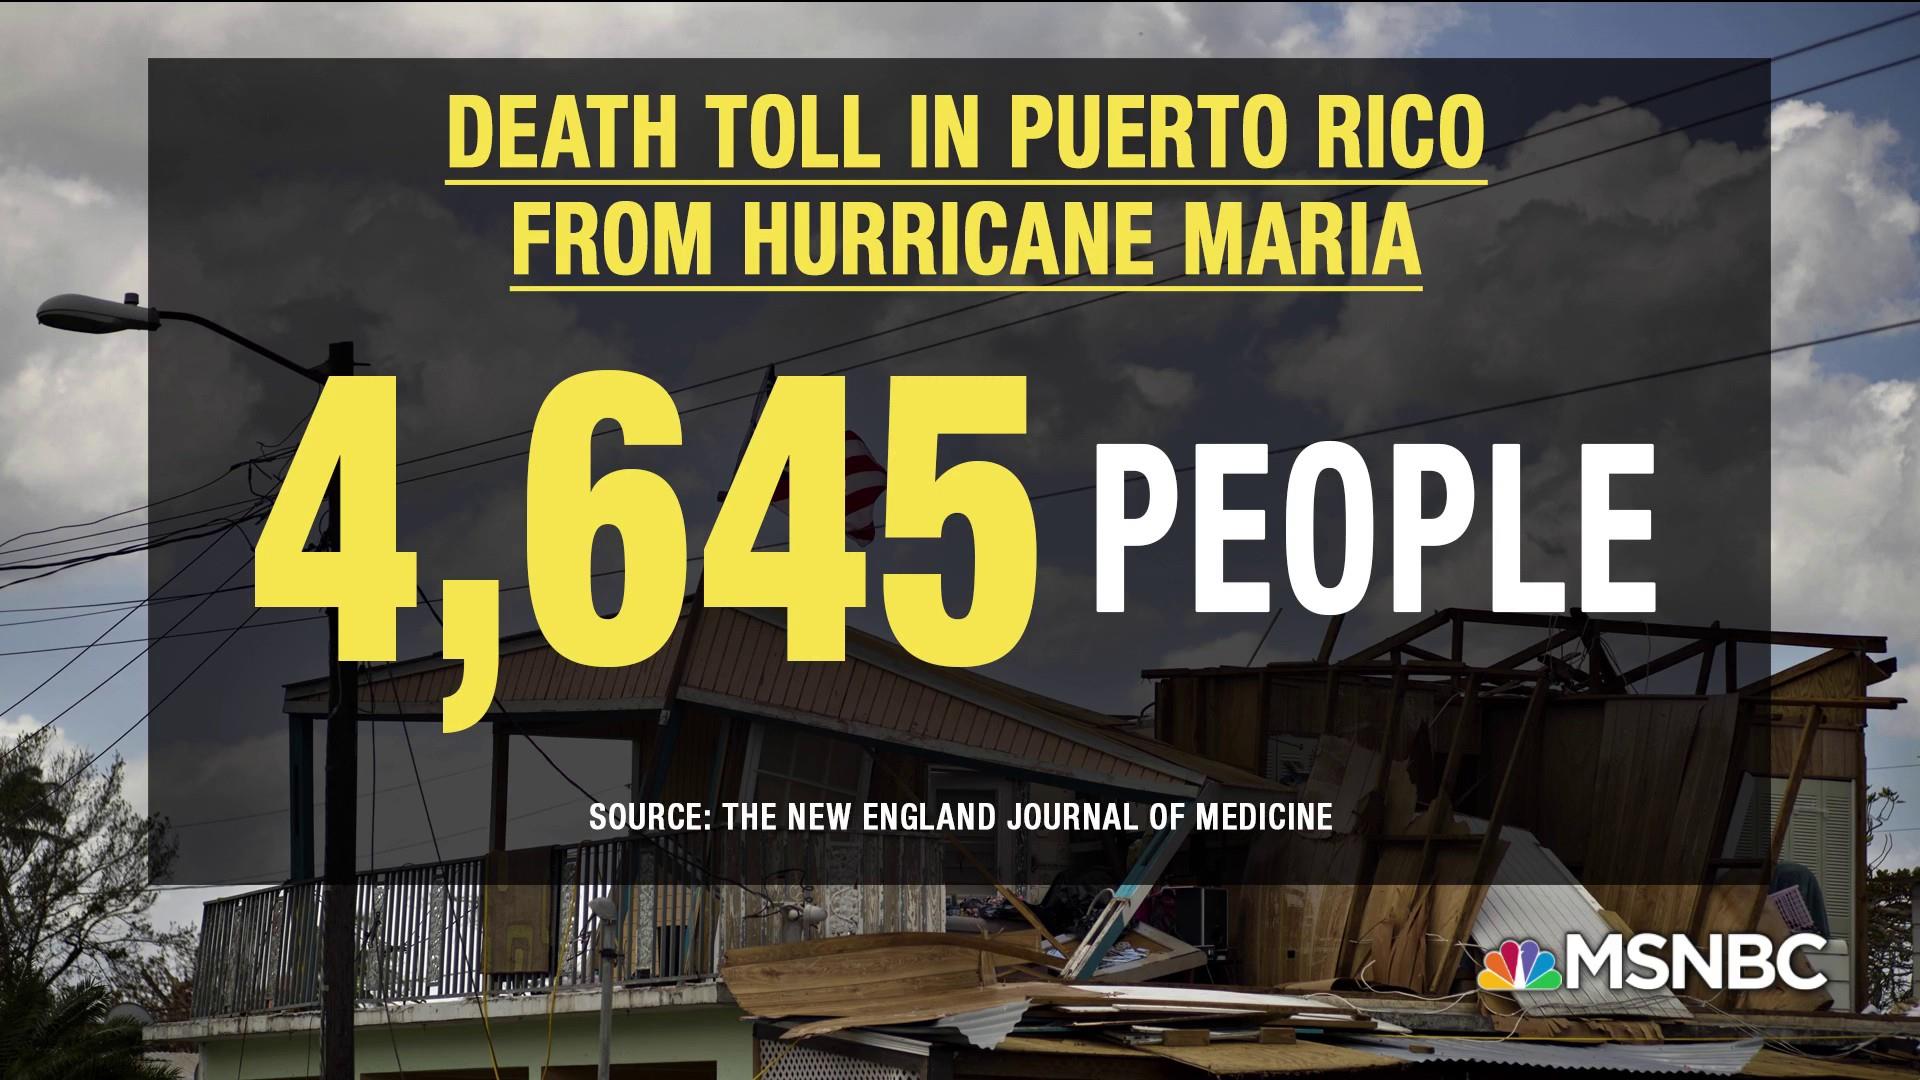 Puerto Rico Hurricane Maria fatalities could be in thousands